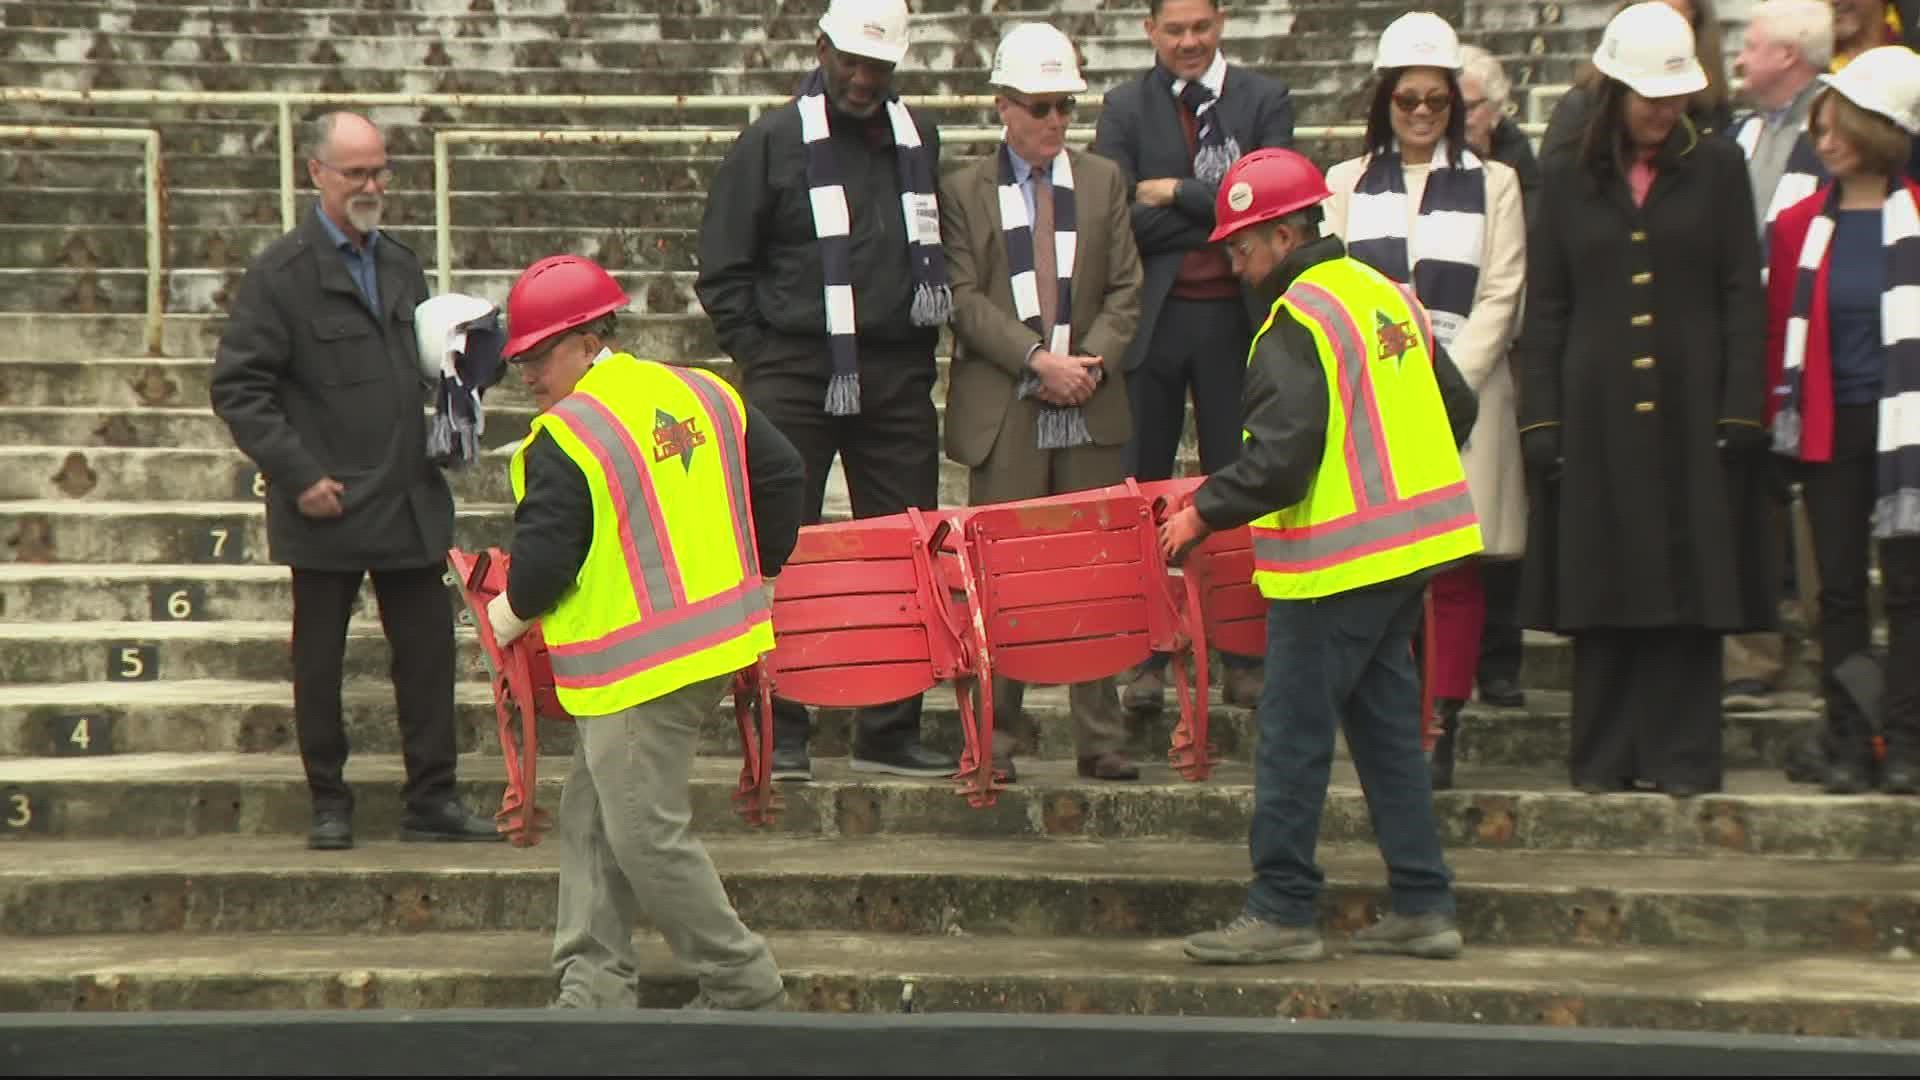 It is the end of an era in D.C. as the orange wooden seats of RFK Stadium's lower bowl were removed Thursday afternoon.